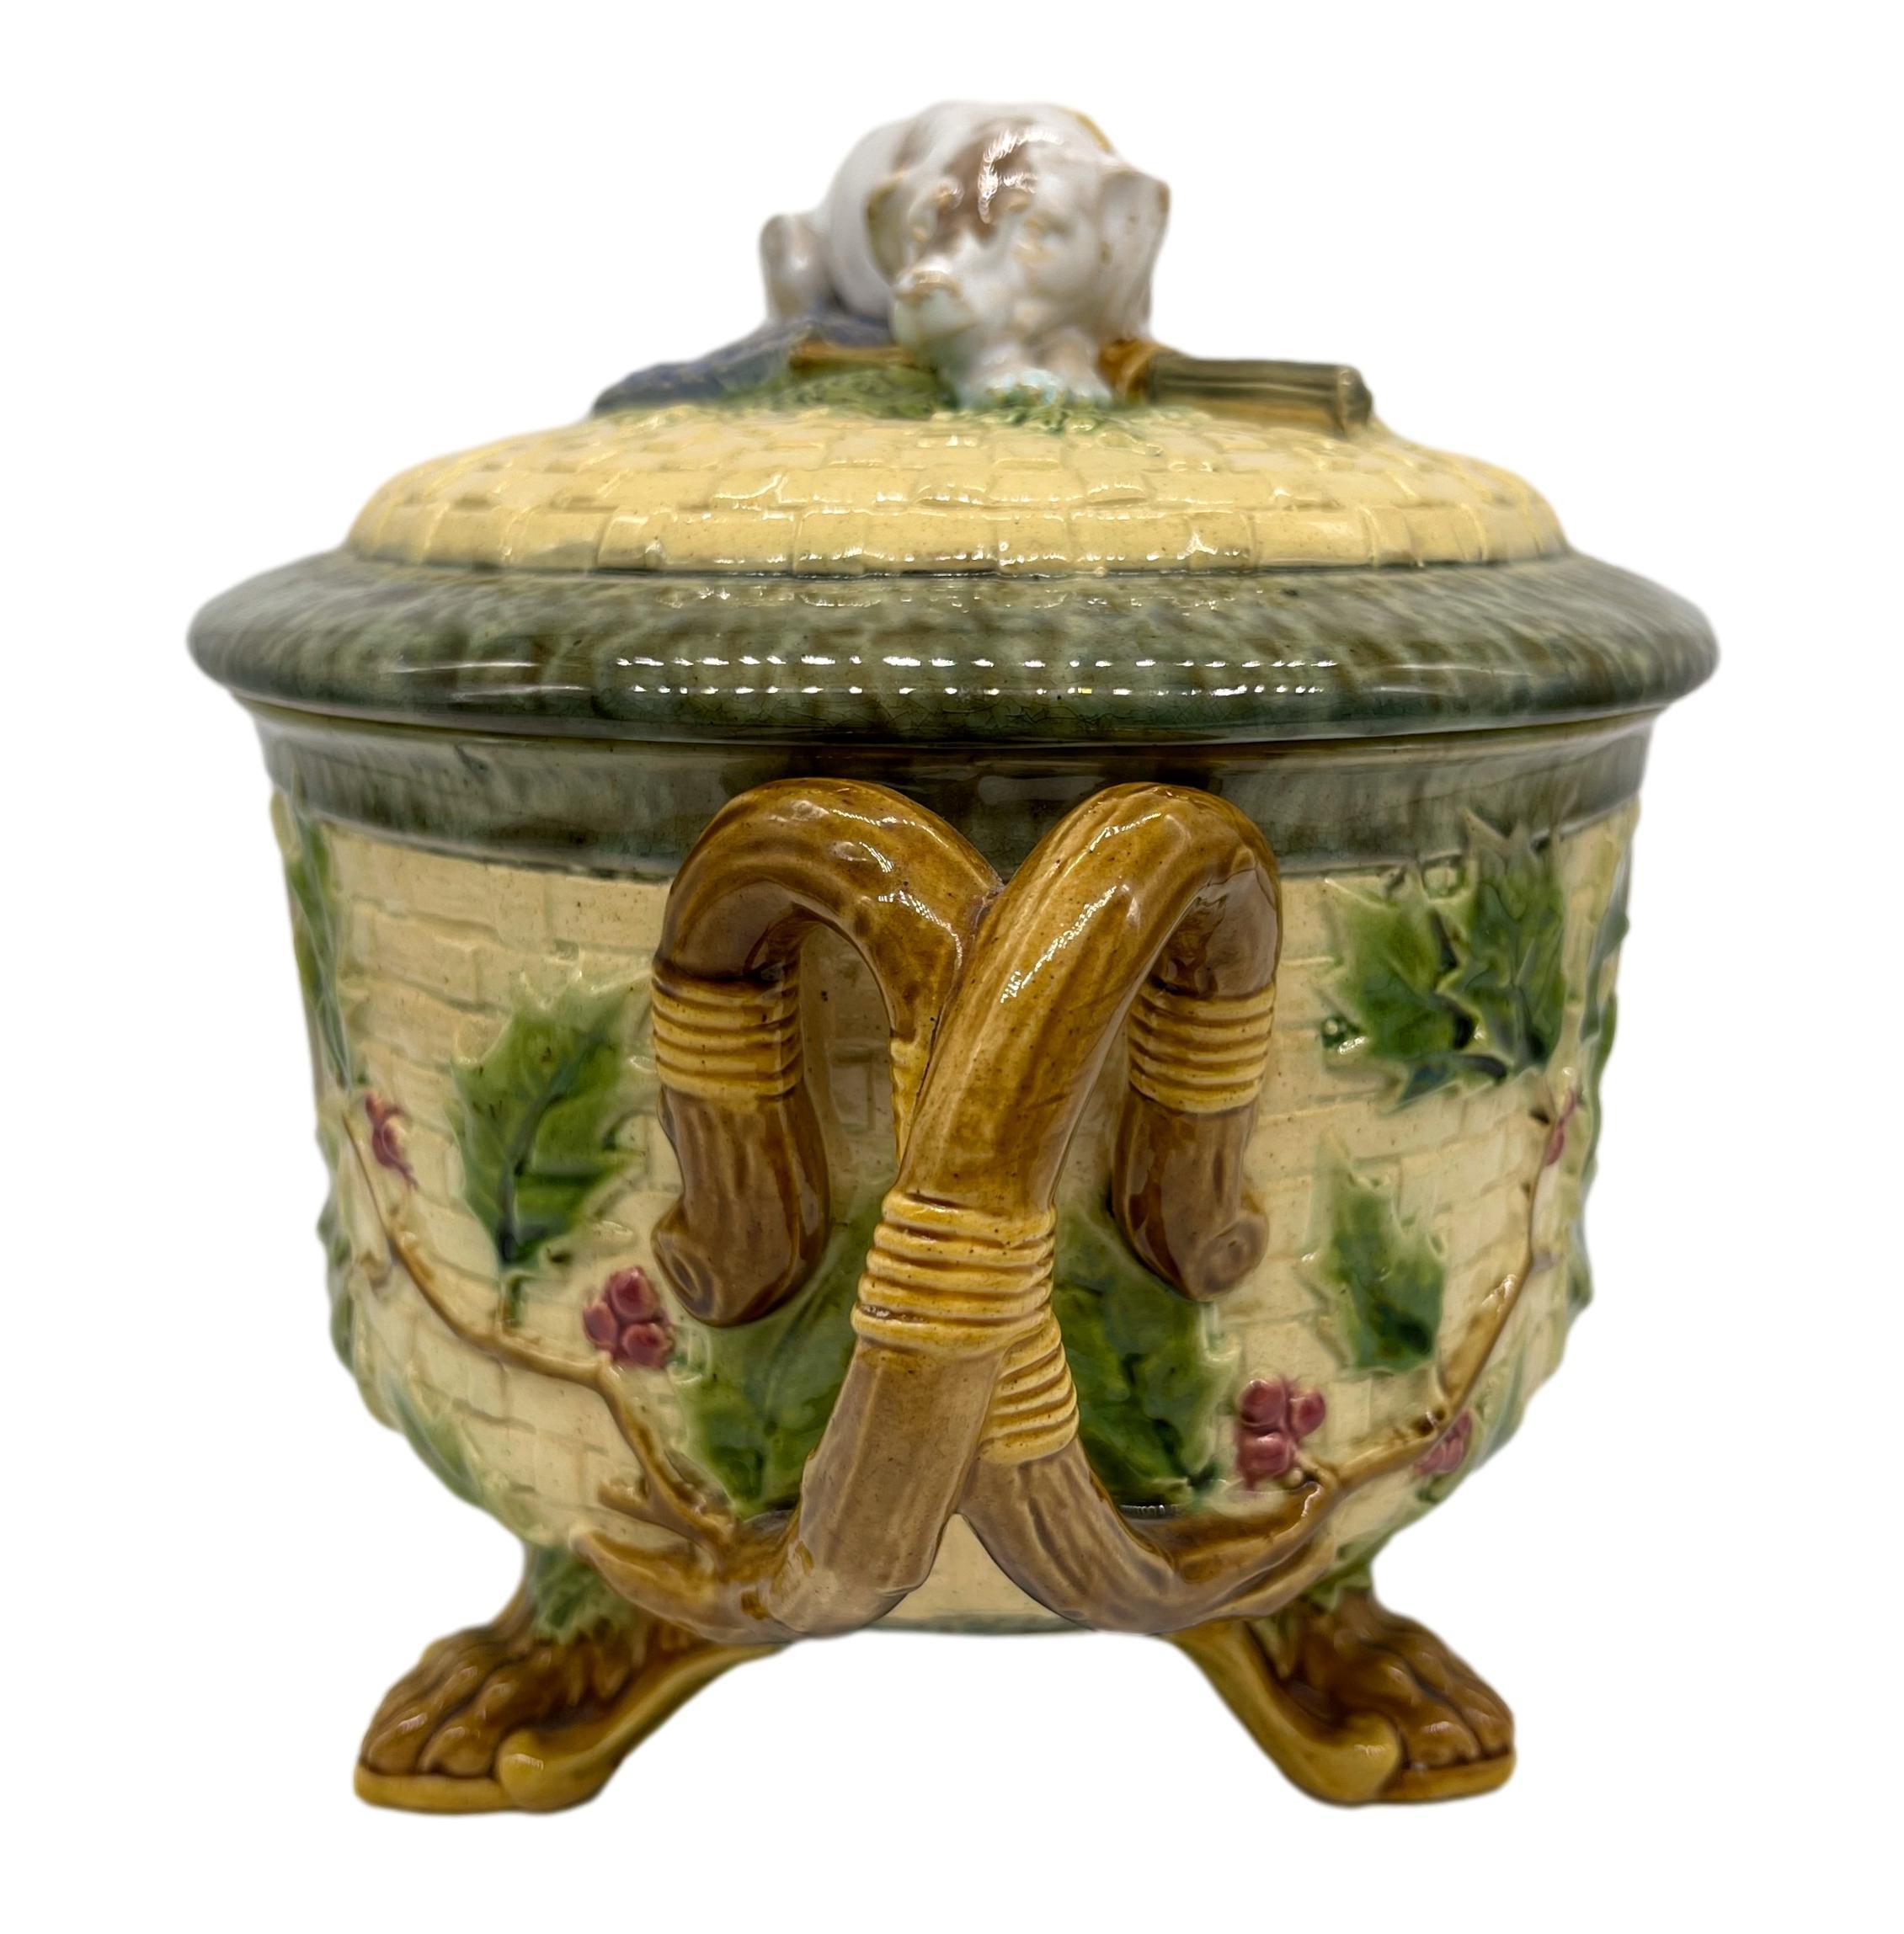 English Minton Majolica Game Tureen with Hunting Dog Finial, Dated 1872